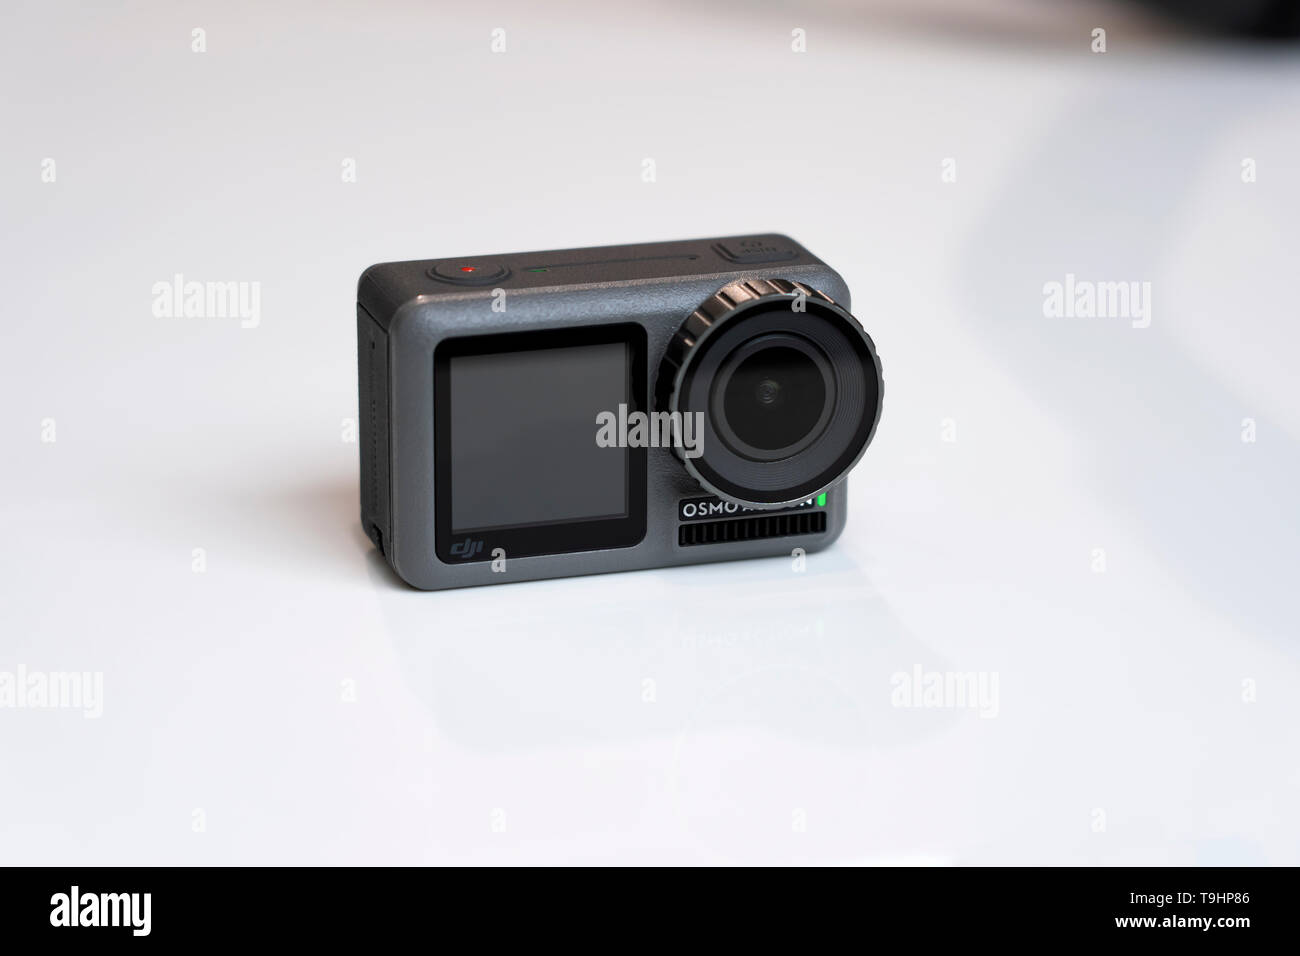 CHINA, SHANGHAI - MAY 18, 2019. CLOSEUP VIEW OF DJI OSMO ACTION AND WHITE BACKGROUND. Stock Photo